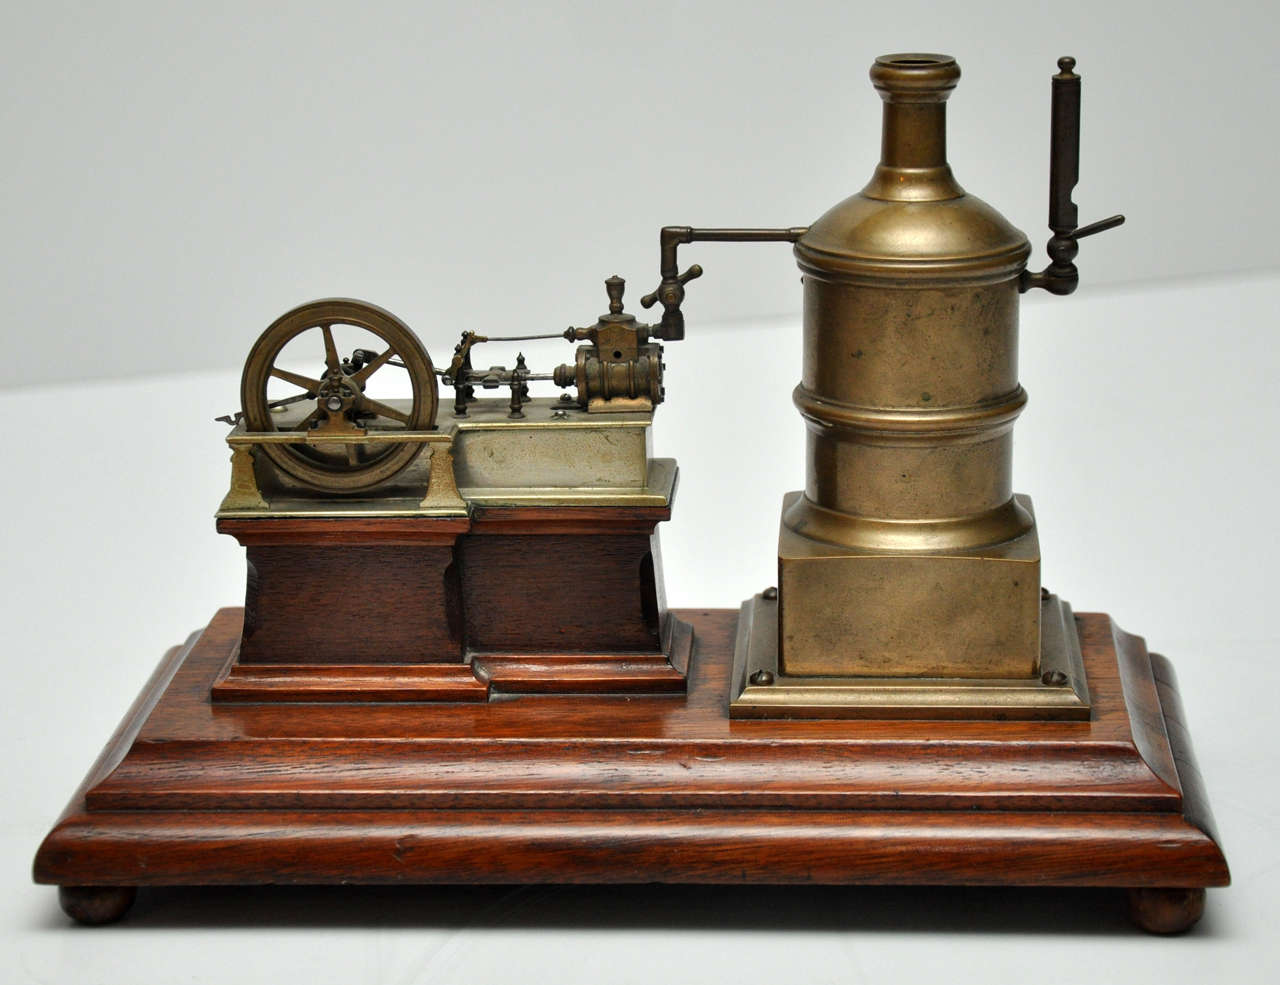 19th Century Brass Stationary Steam Engine on Walnut Base, France, 1870
Signed: ORESTES PAGAN 
Fabicante: Filadelfia  
With original Spirit Burner operates well.
Made for the Centennial International Exhibition of 1876, the first official